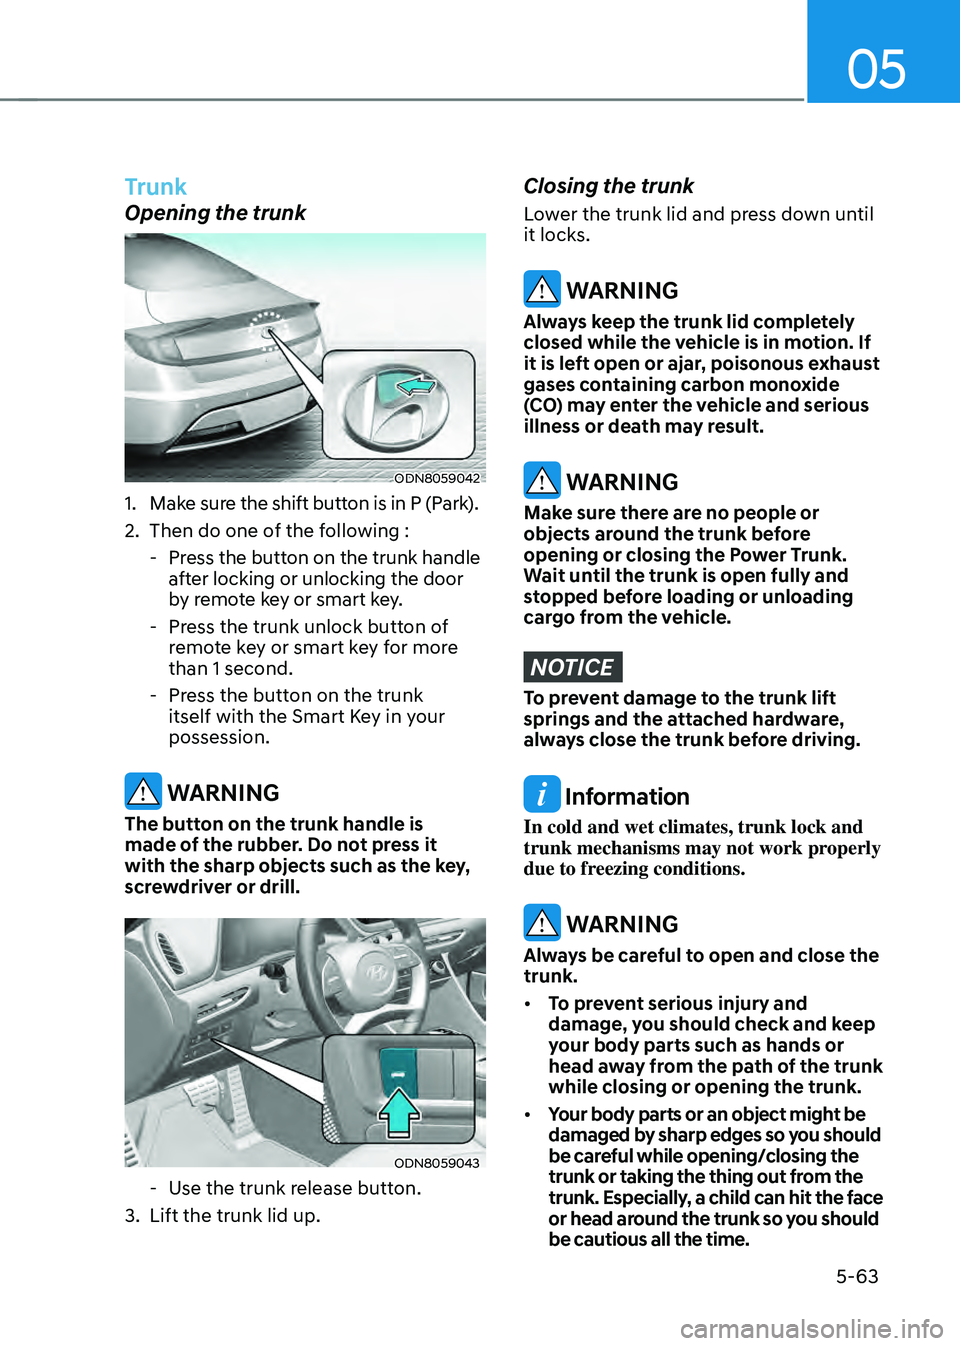 HYUNDAI SONATA HYBRID 2022  Owners Manual 05
5-63
Trunk
Opening the trunk
ODN8059042
1. Make sure the shift button is in P (Park).
2. Then do one of the following :
 -Press the button on the trunk handle 
after locking or unlocking the door 
